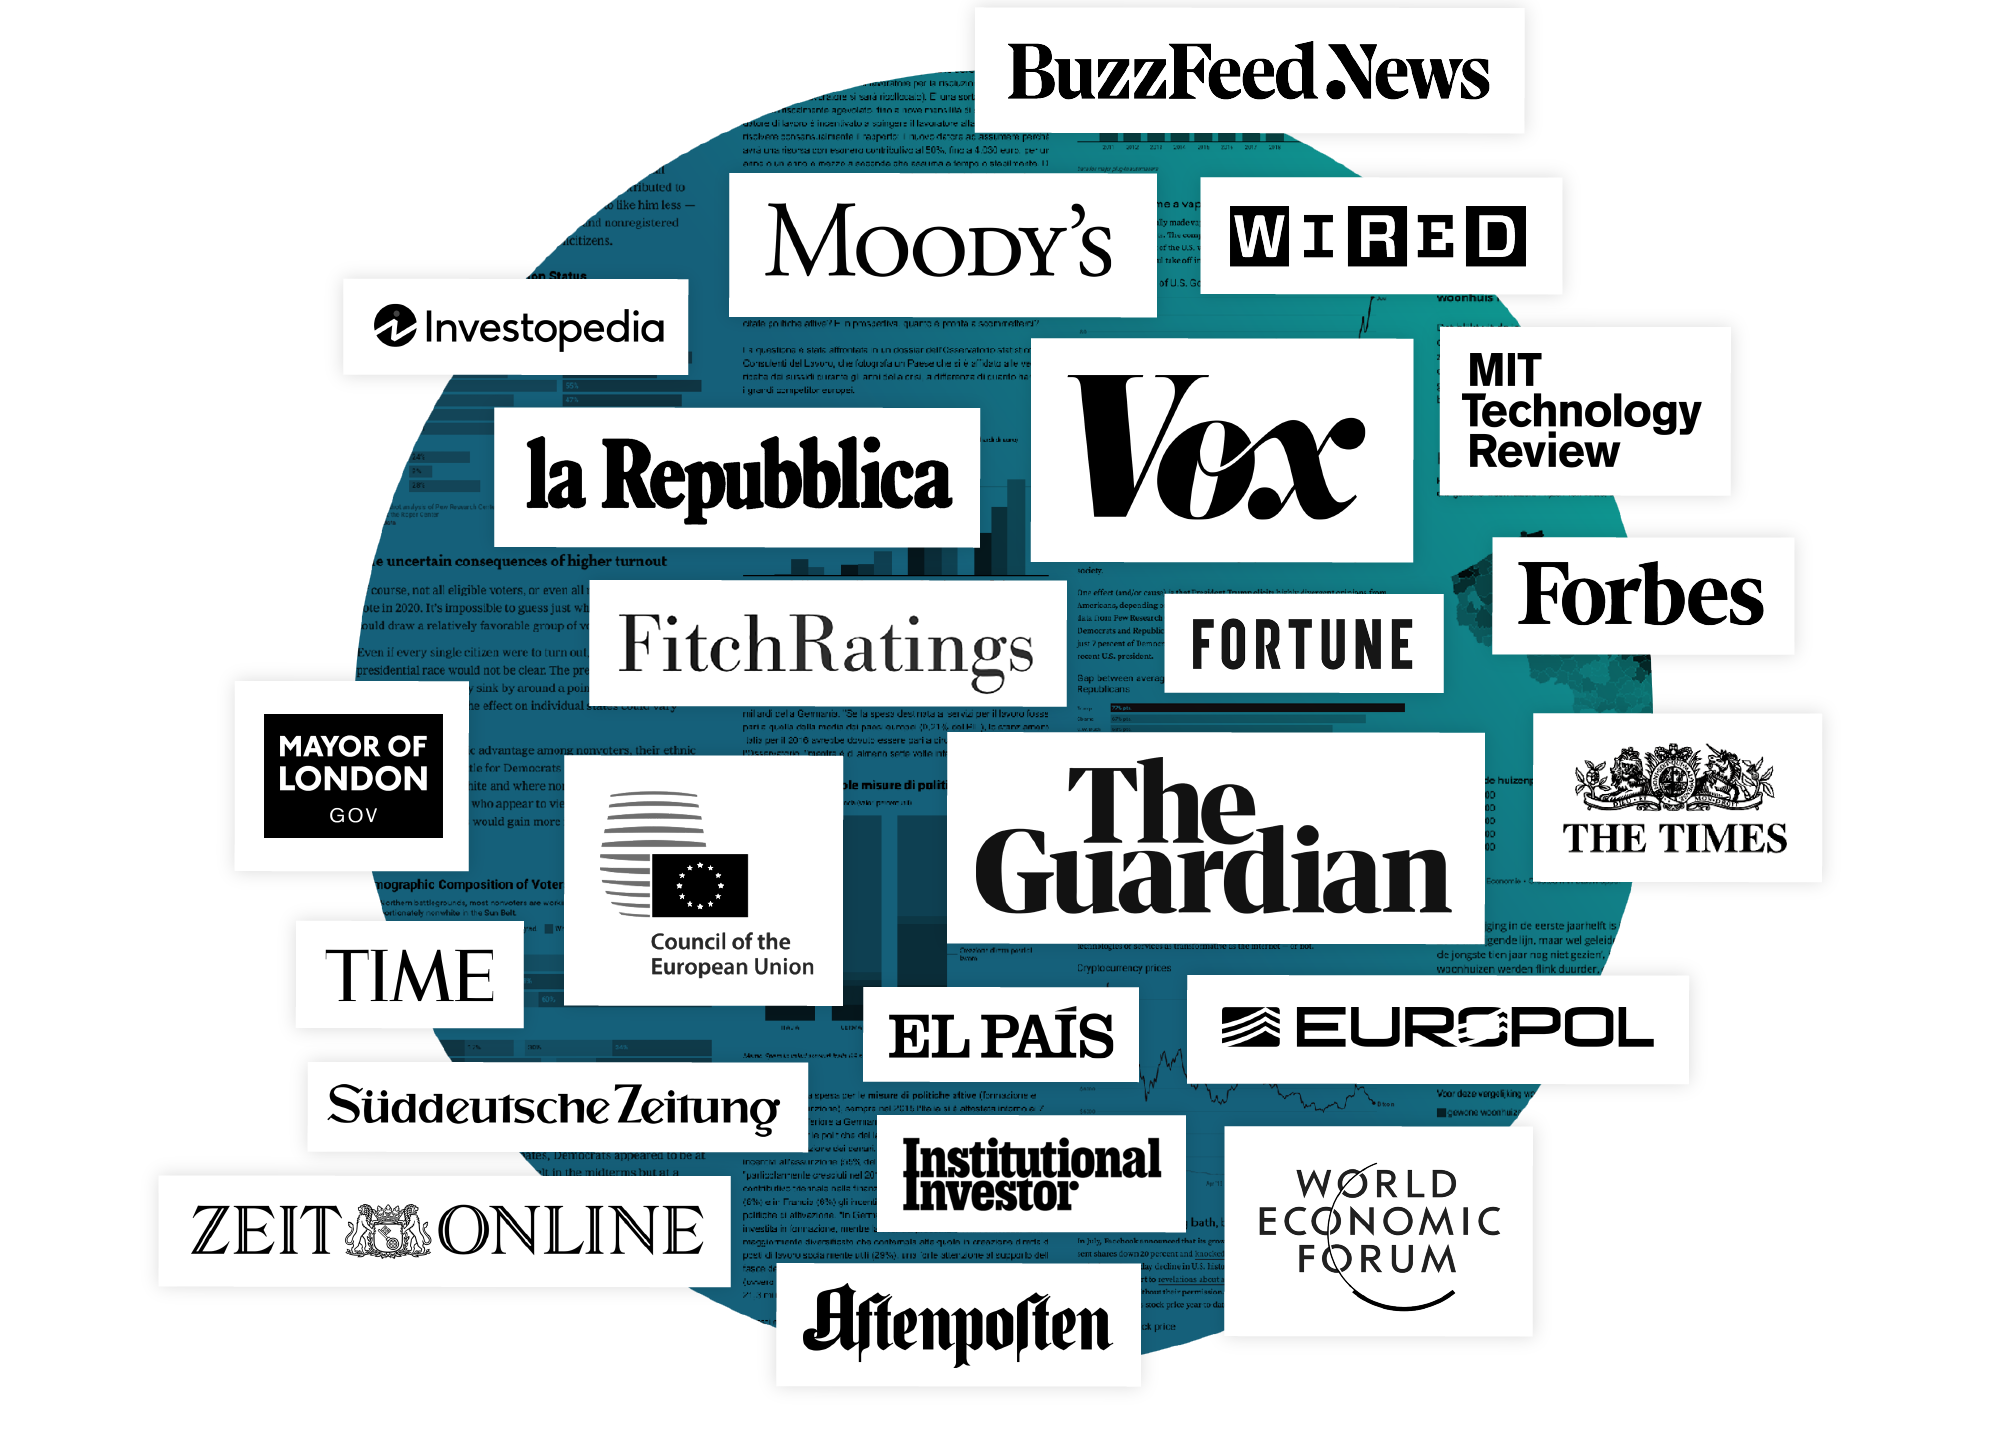 Logo wall showing companies that use Datavis, like BuzzFeed News, Vox, Guardian, Fitch Ratings, Moodys, Forbes, The Times